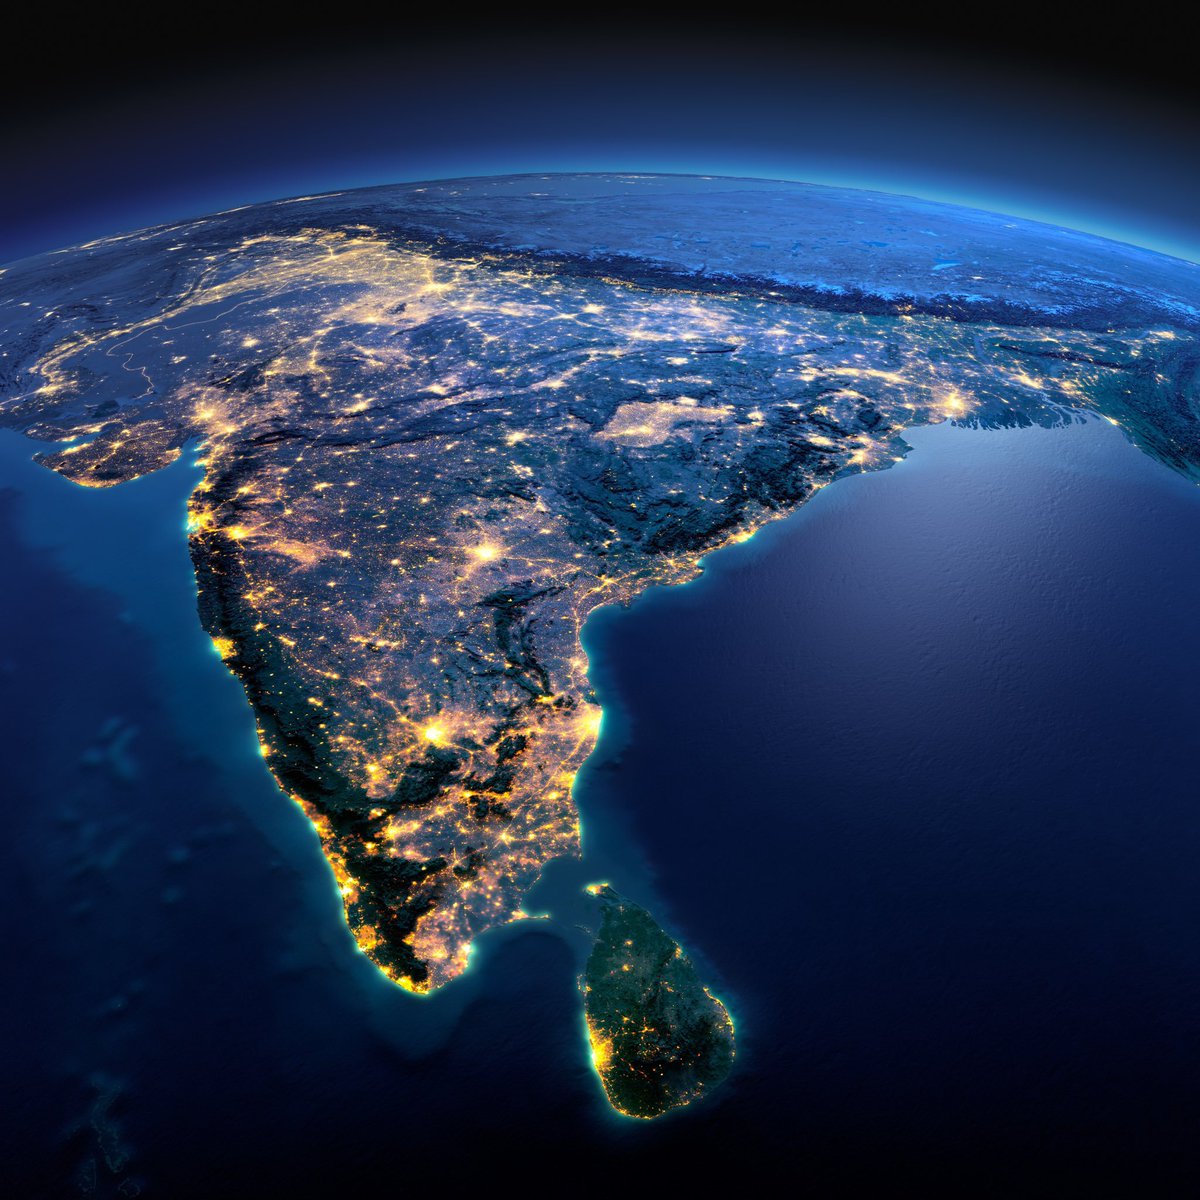 The Indian Subcontinent by night.